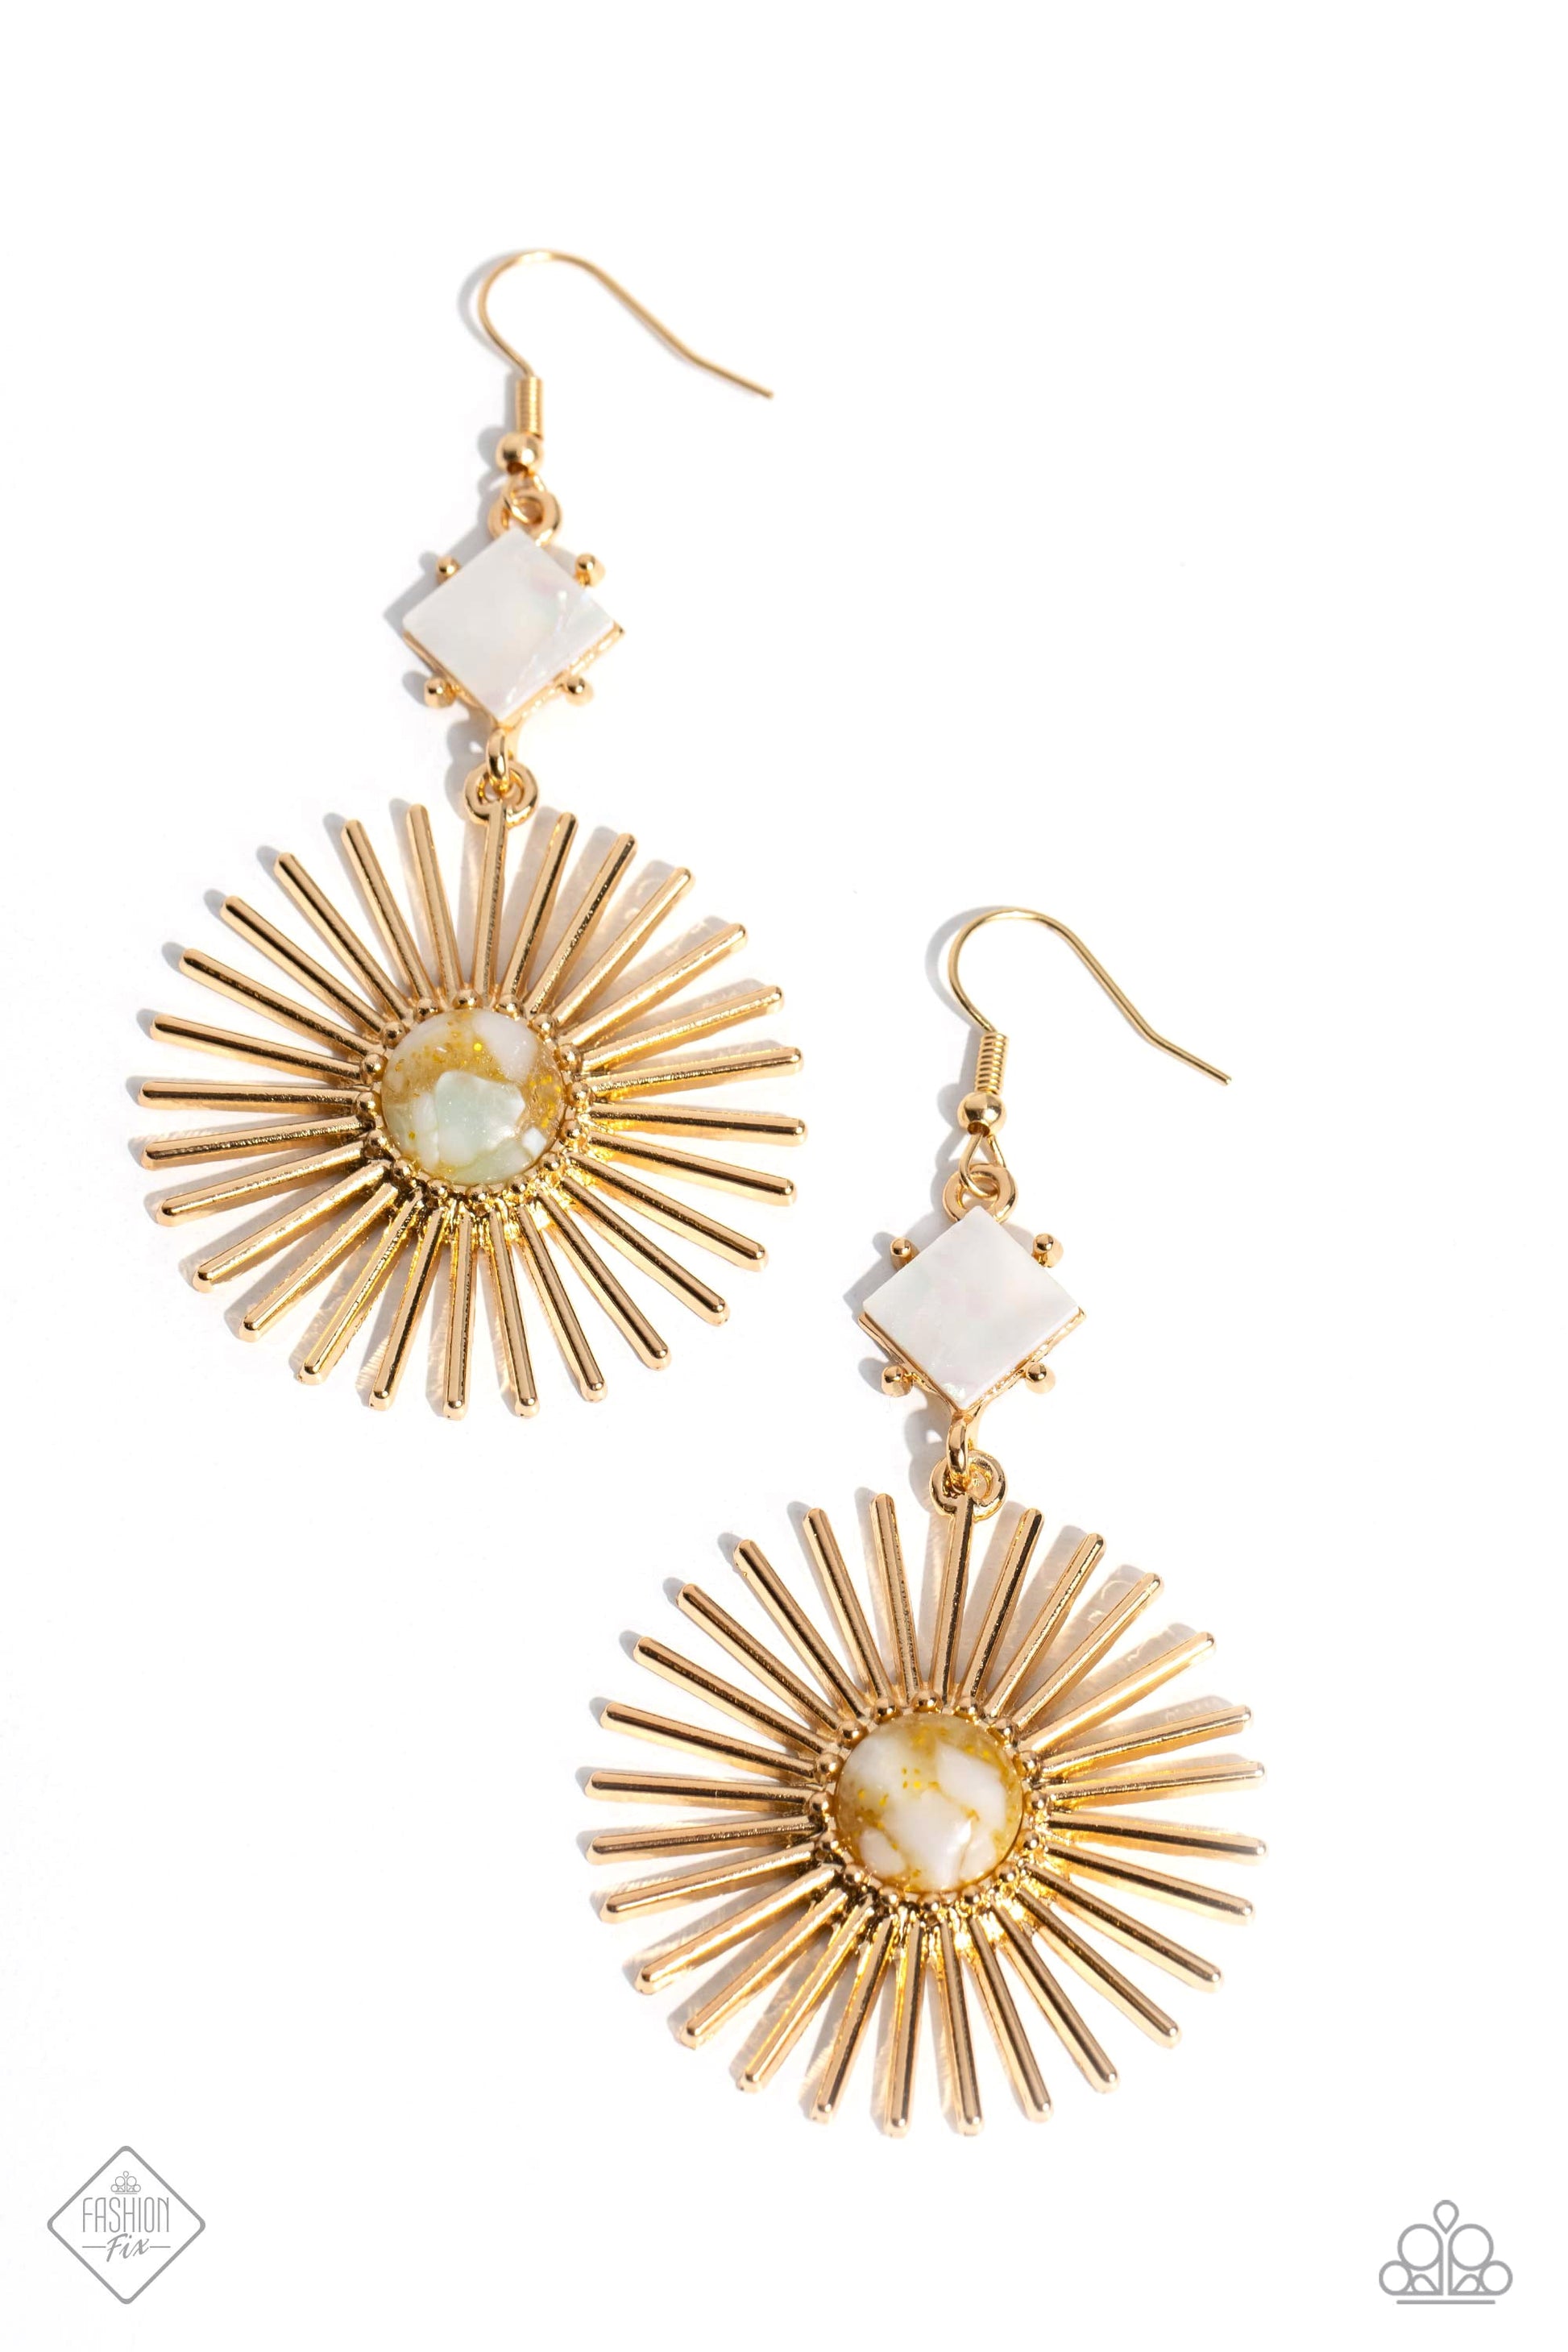 Seize the Sunburst - Gold Earrings - Paparazzi Accessories - A white shell is tilted on its side and bordered by gold studs, giving way to a large gold sunburst dotted with a multicolored stone center; resulting in a whimsically radiant lure. Earring attaches to a standard fishhook fitting.